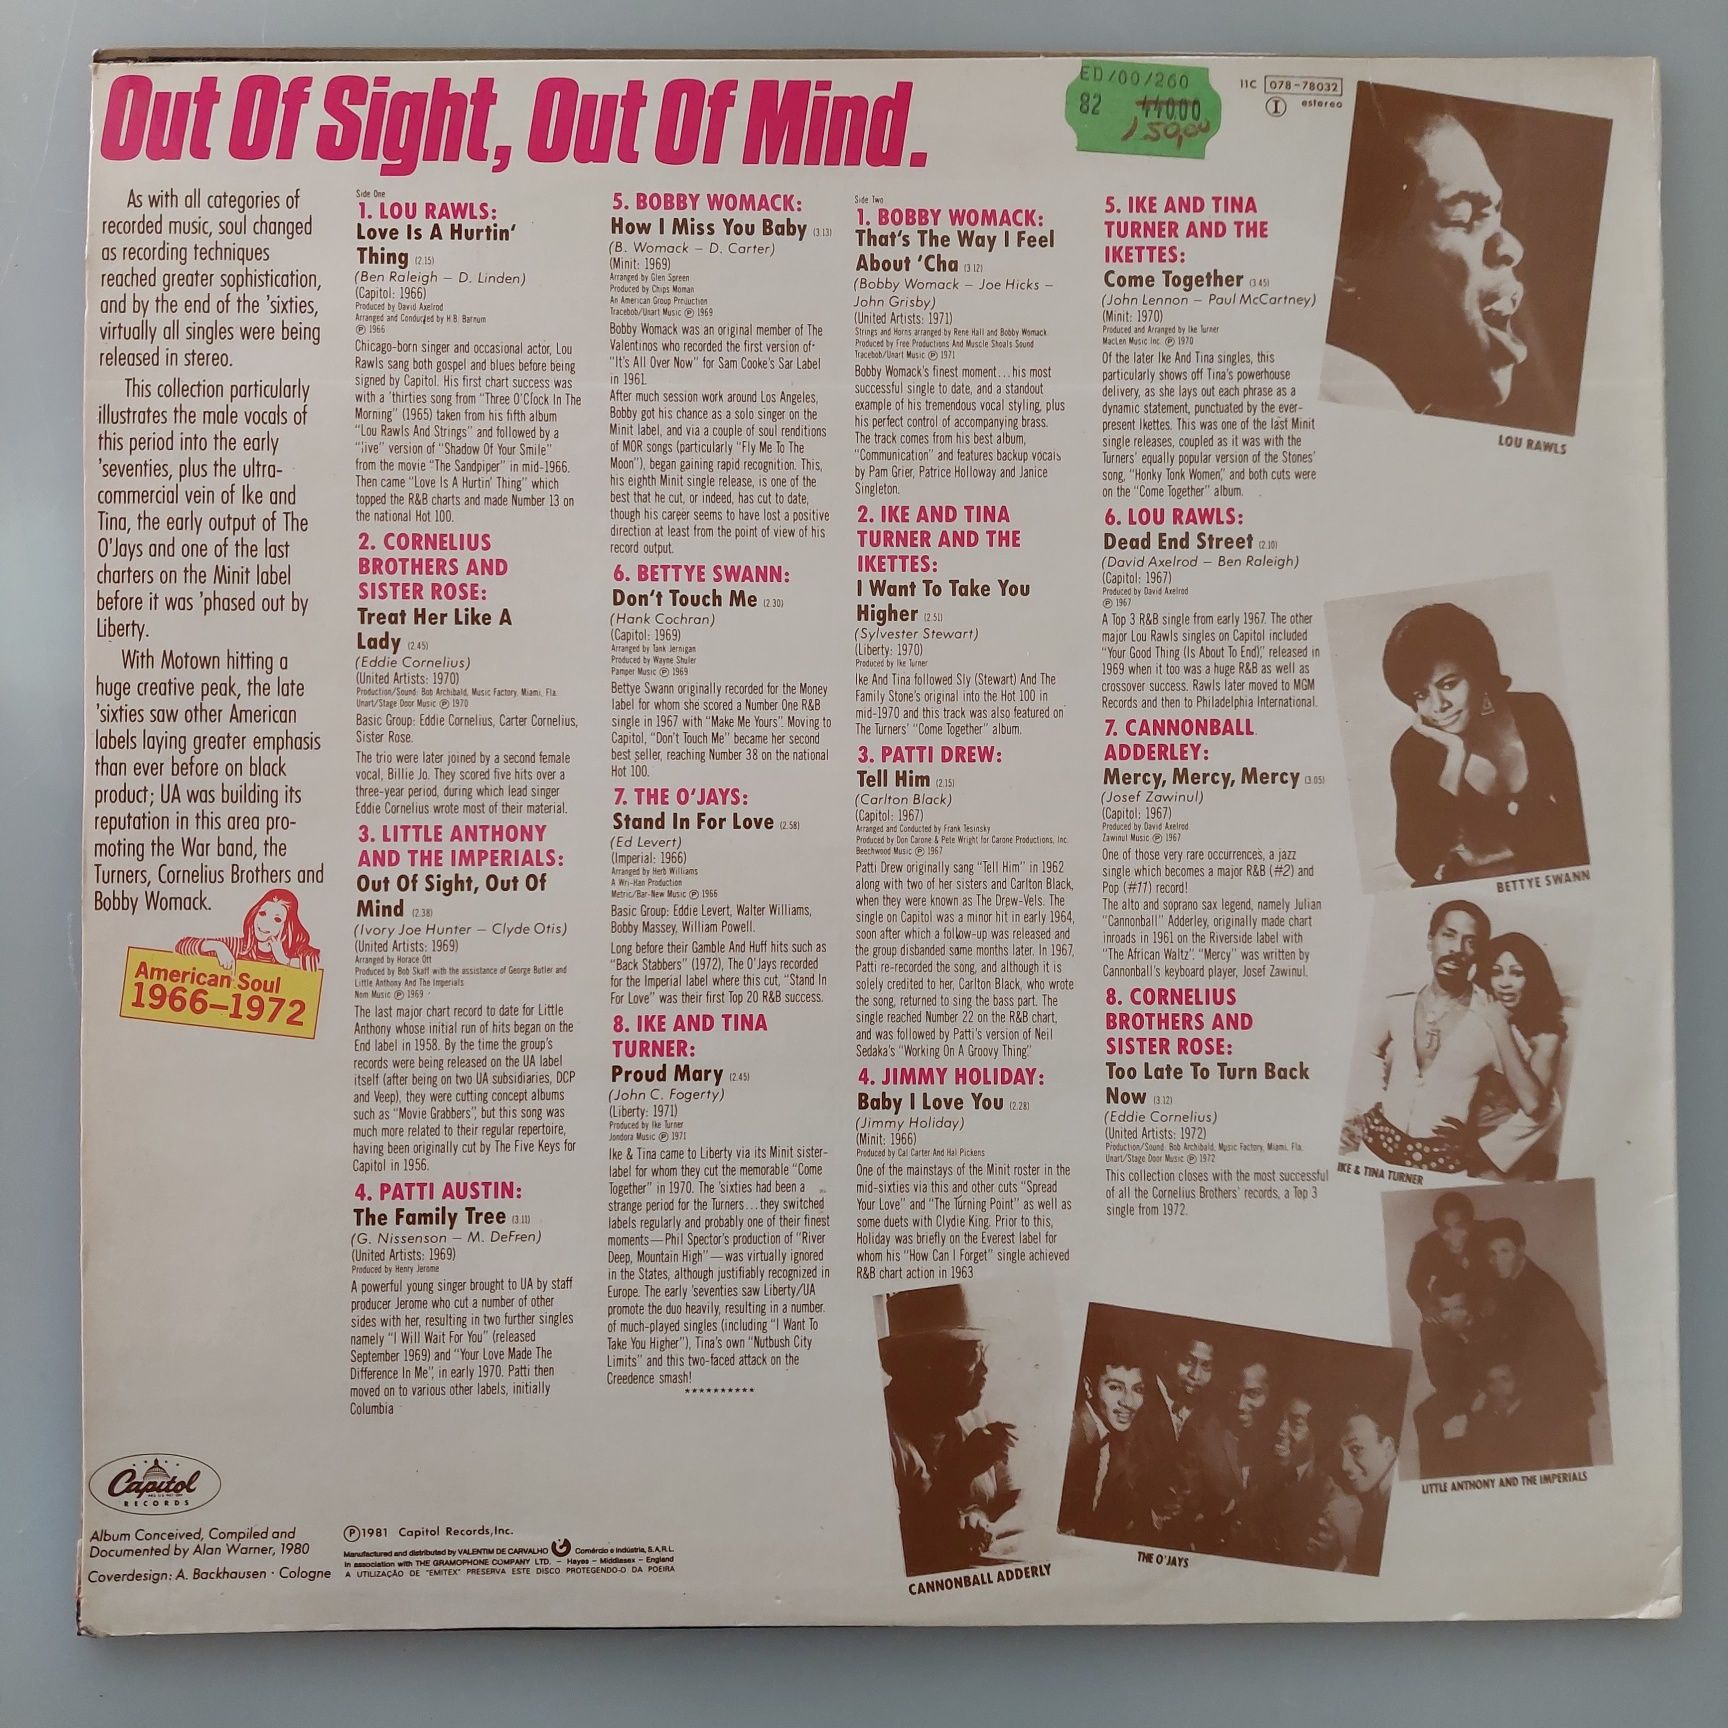 Out Of Sight, Out Of Mind: American Soul 1966-72